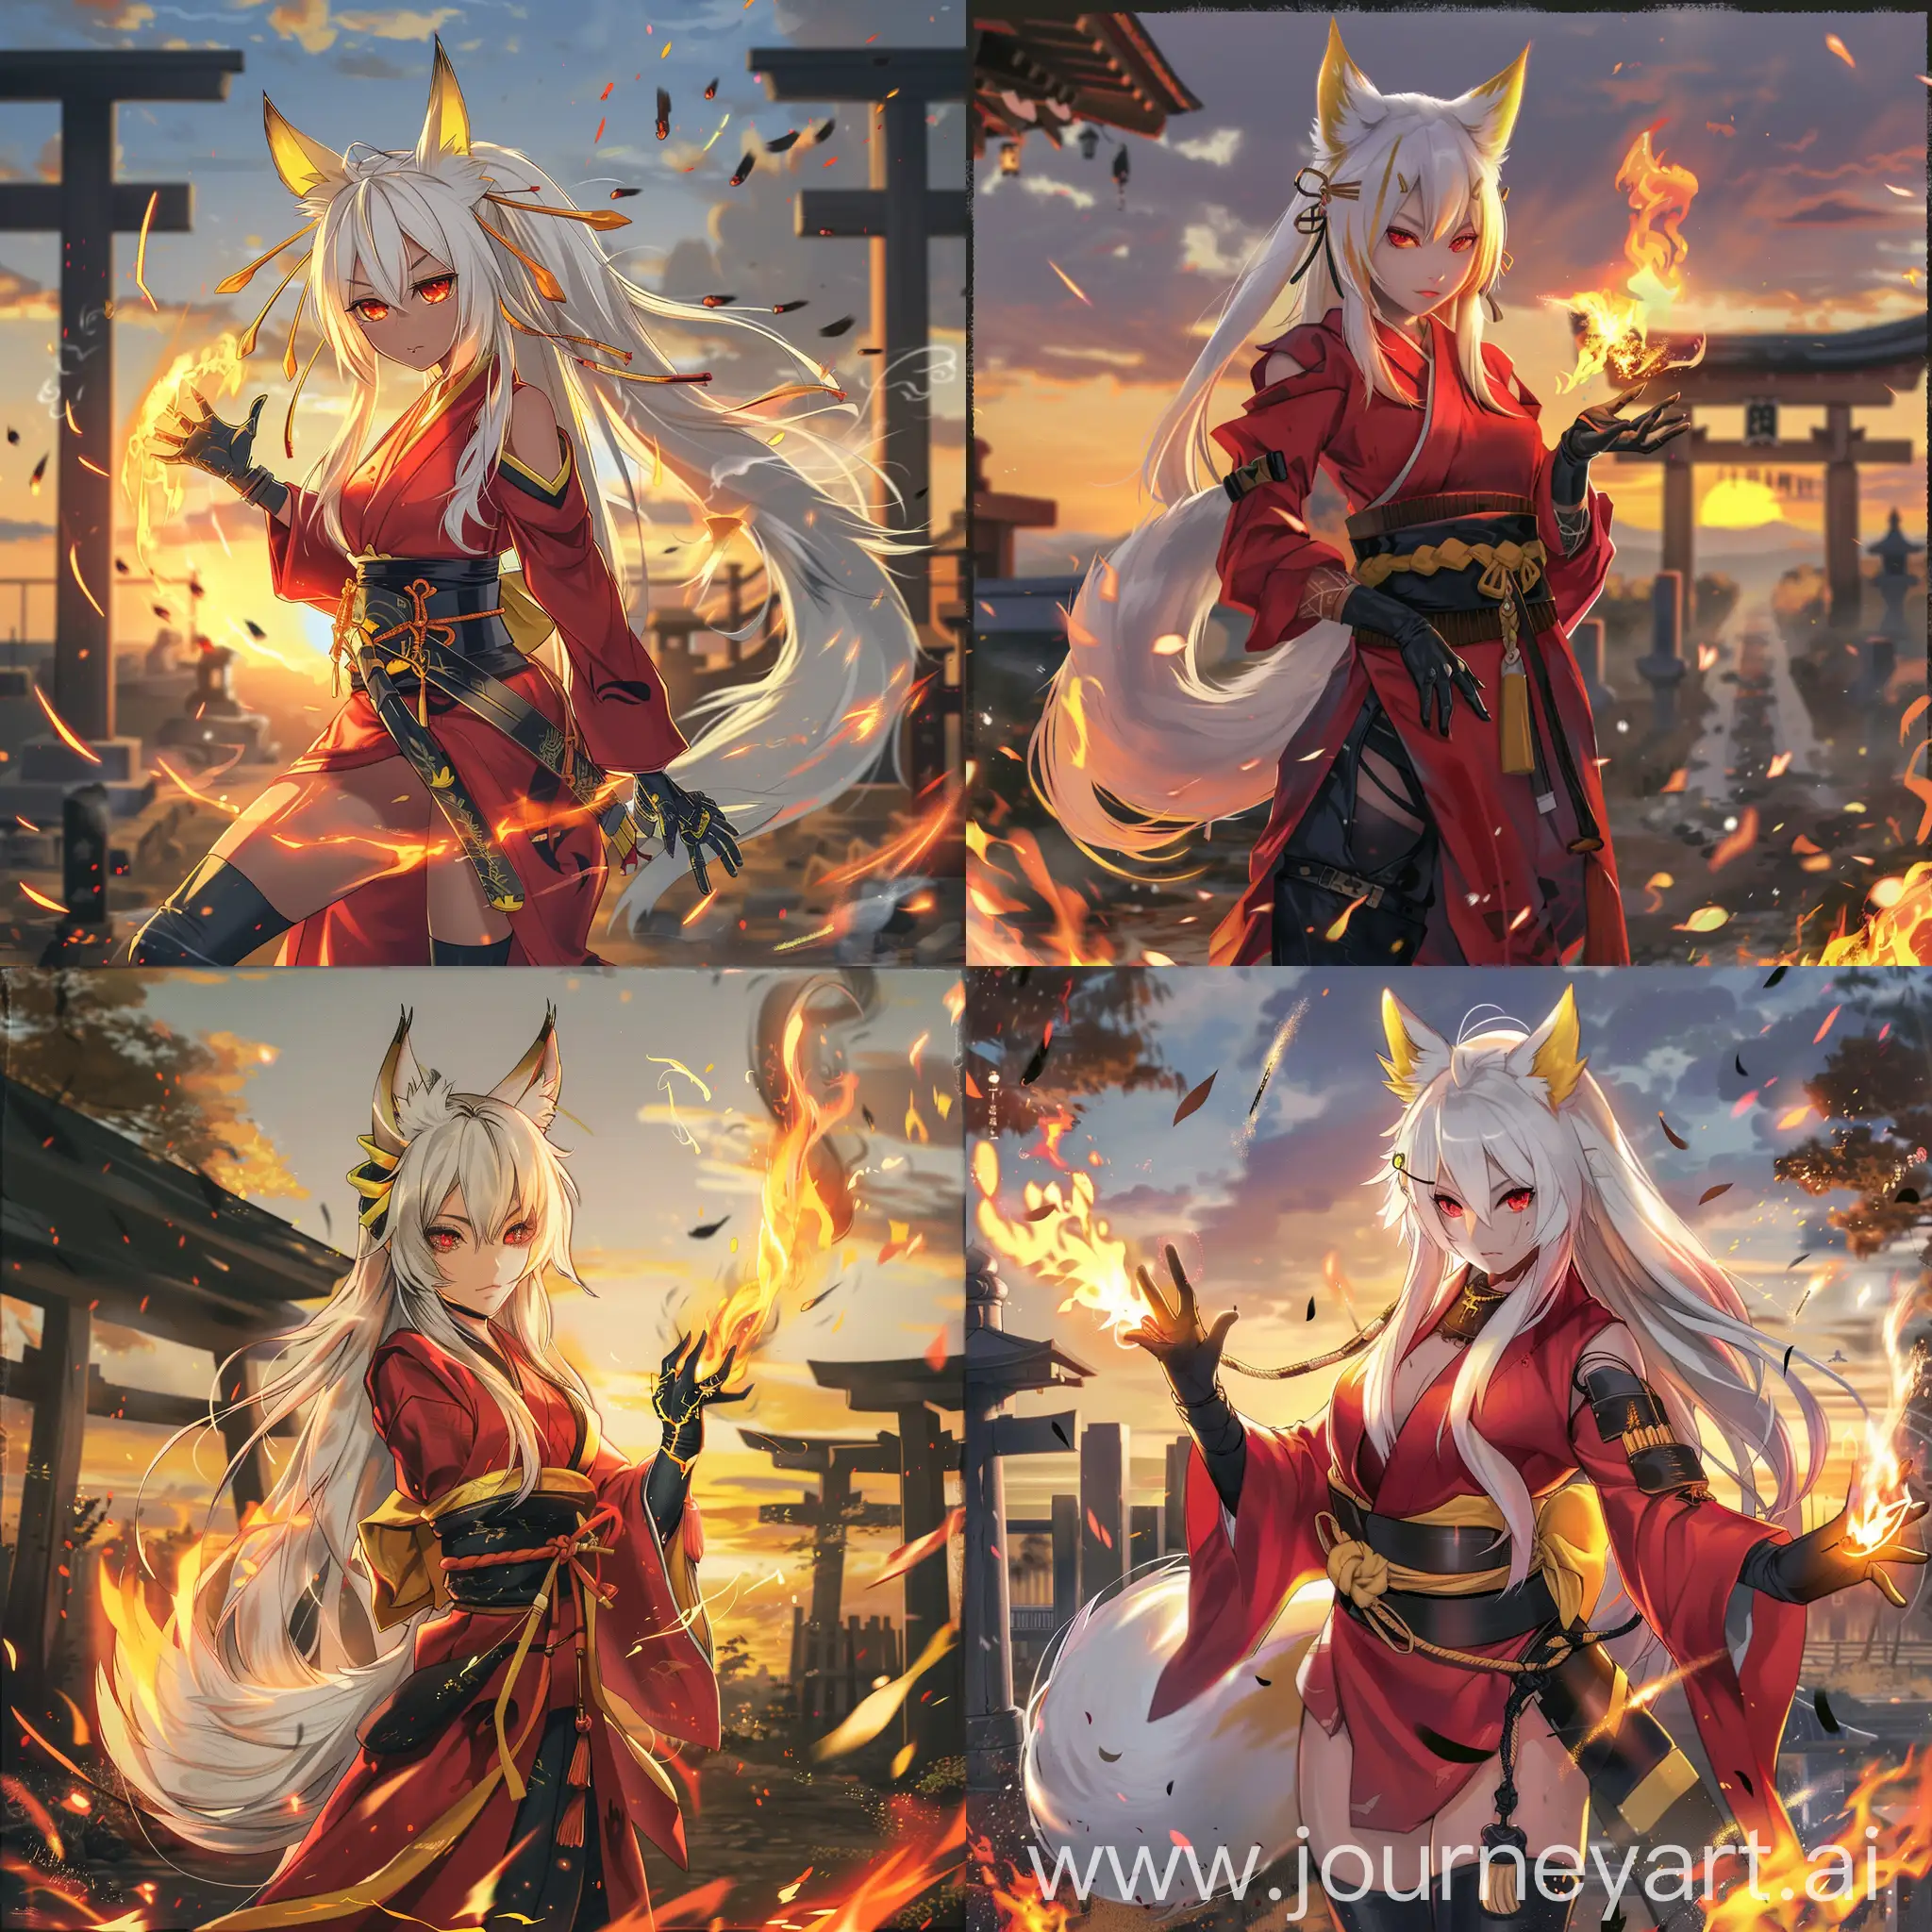 anime-style, full body, athletic, beautiful, tan skin, asian woman, long white hair with yellow highlights, white fox ears with yellow tips, white fox tail with yellow tip attached to her waist, fiery red eyes, wearing a red kimono, black hakama, black sash, long black gloves, black leather boots, casting fire magic, hands wrapped in fire,  good anatomy, dynamic, embers falling in foreground, shinto shrine, sunset